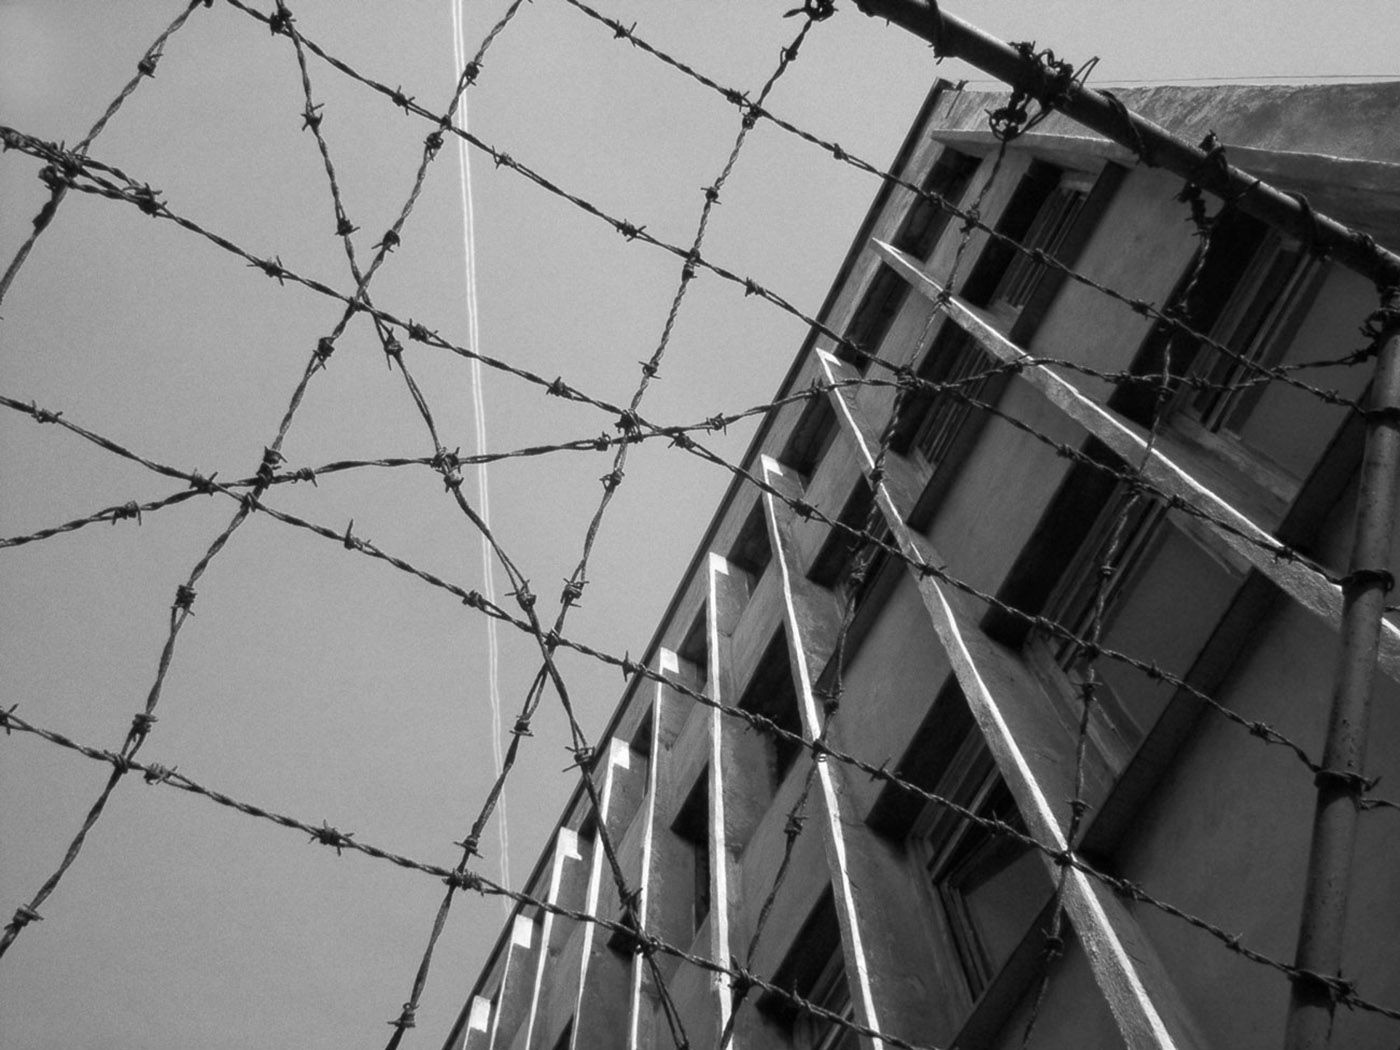 Barbed wire in the foreground, outside prison wall and sky in background